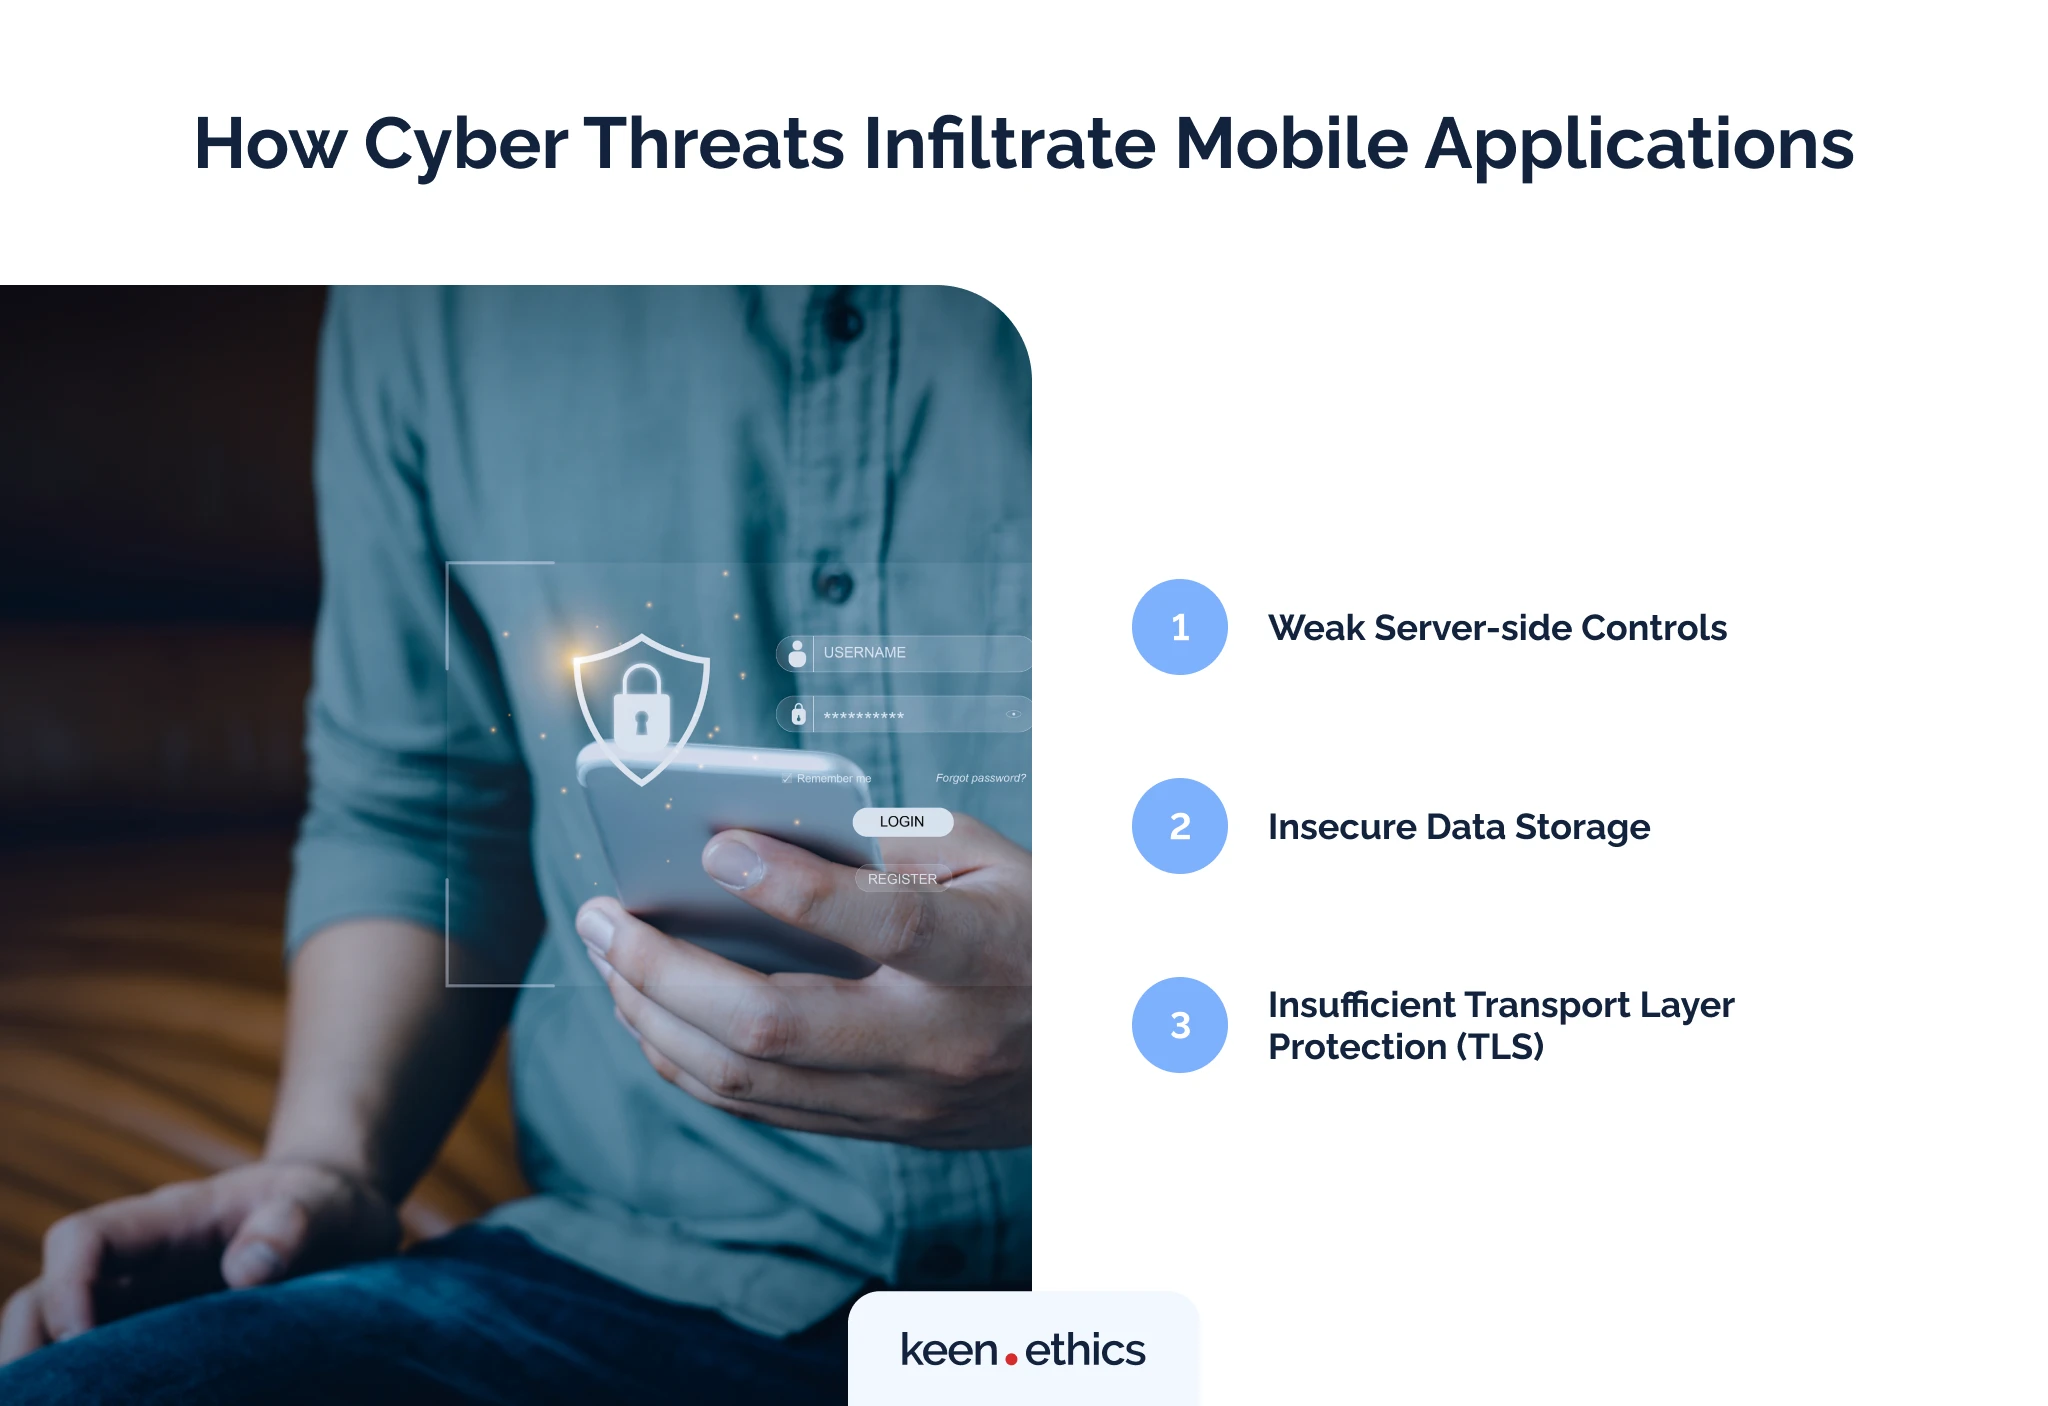 How cyber threats infiltrate mobile applications